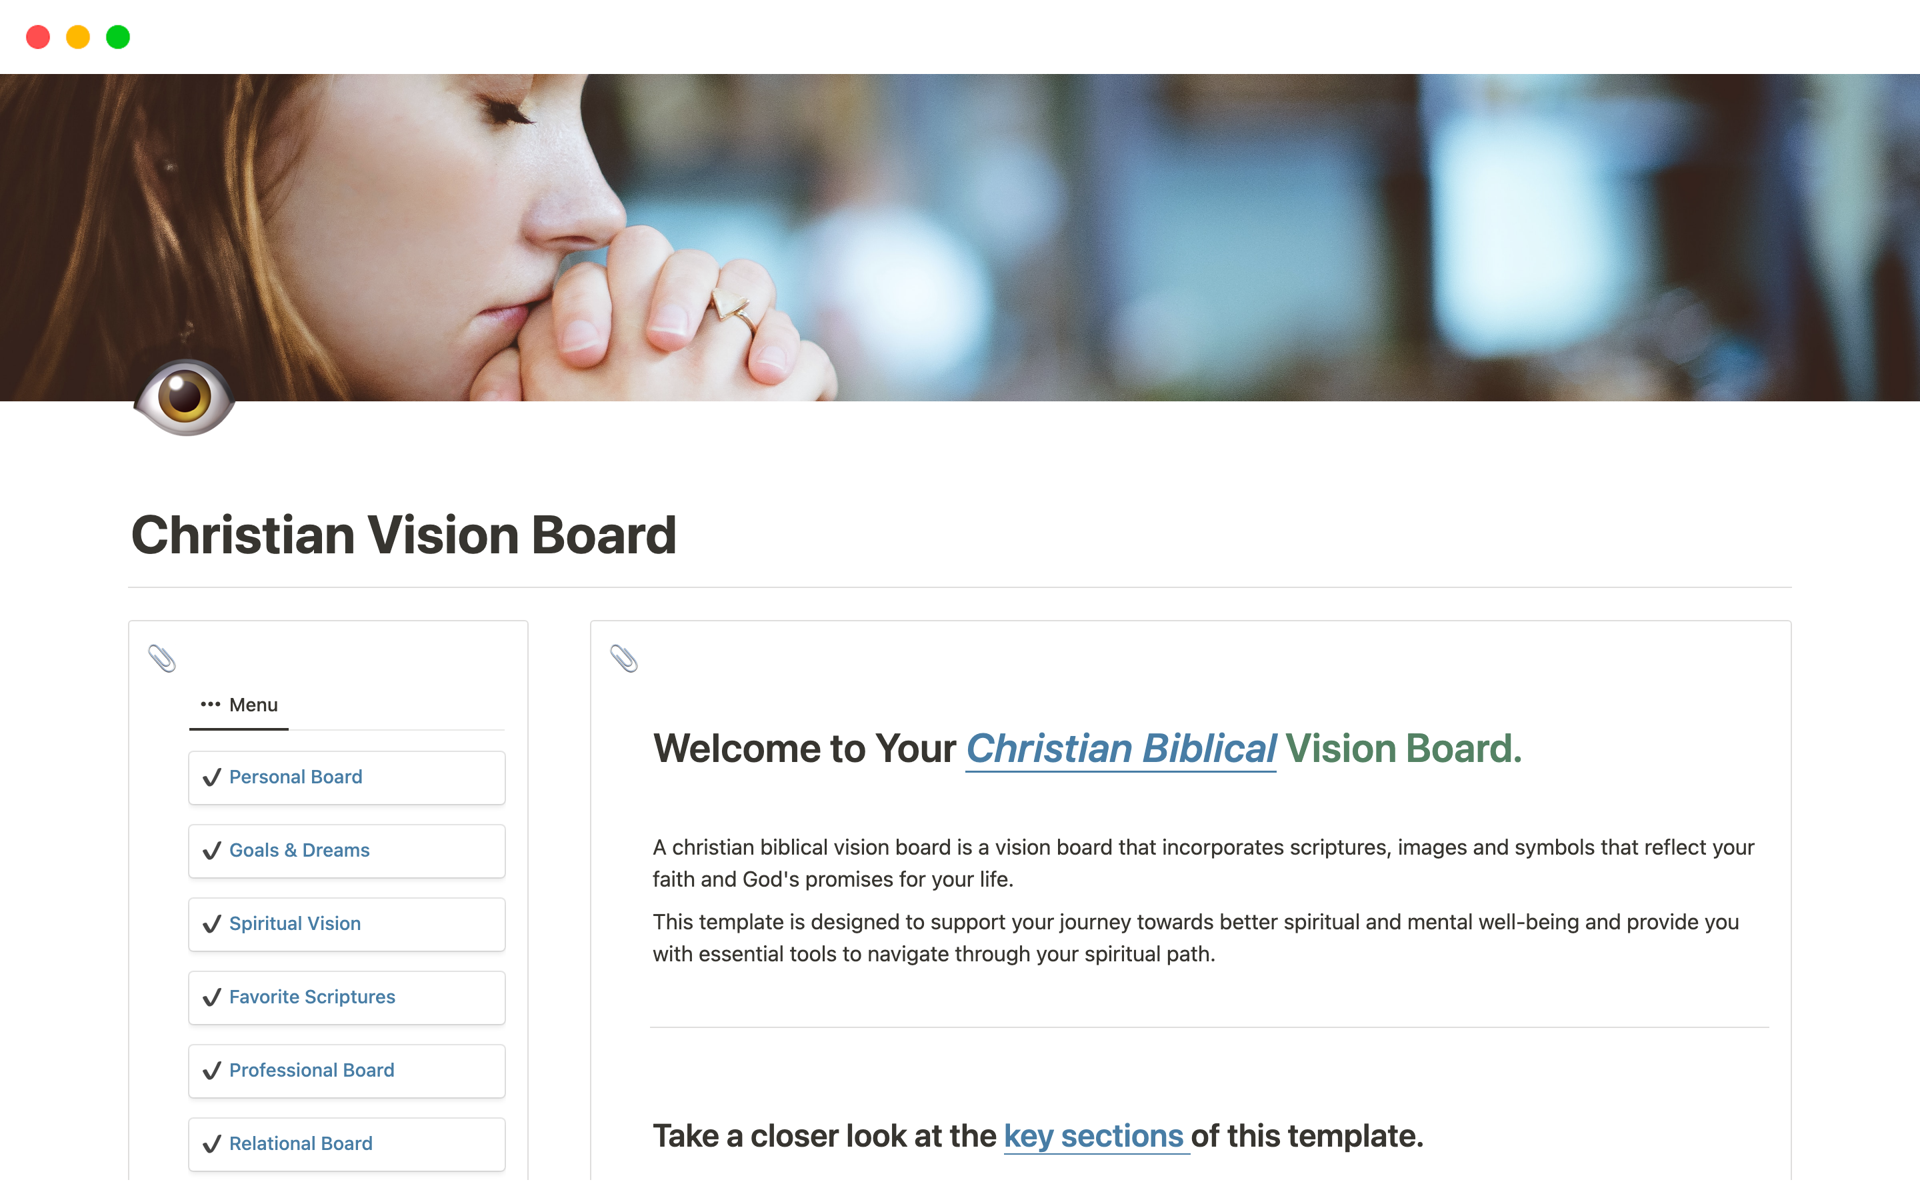 Elevate your spiritual journey with the visually appealing Christian Vision Board Notion Template. This transformative tool seamlessly merges faith and personal growth in a clean and engaging design.